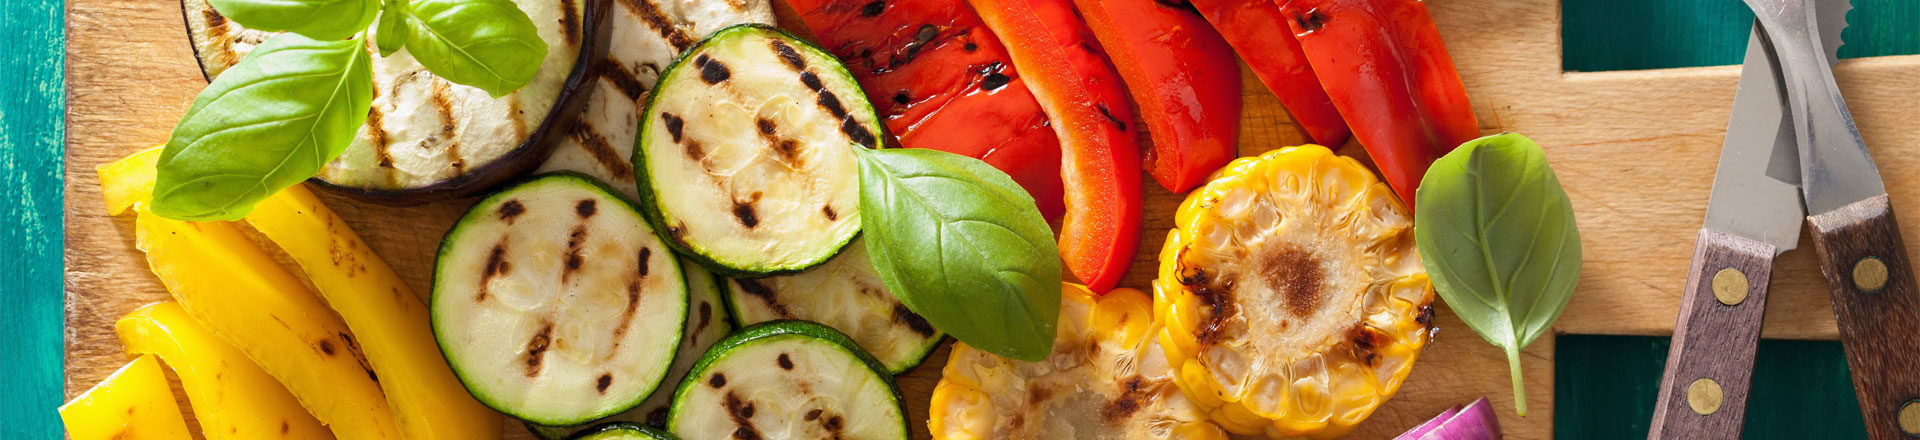 Healthy BBQ ideas - grilled zucchini, peppers and yellow squash